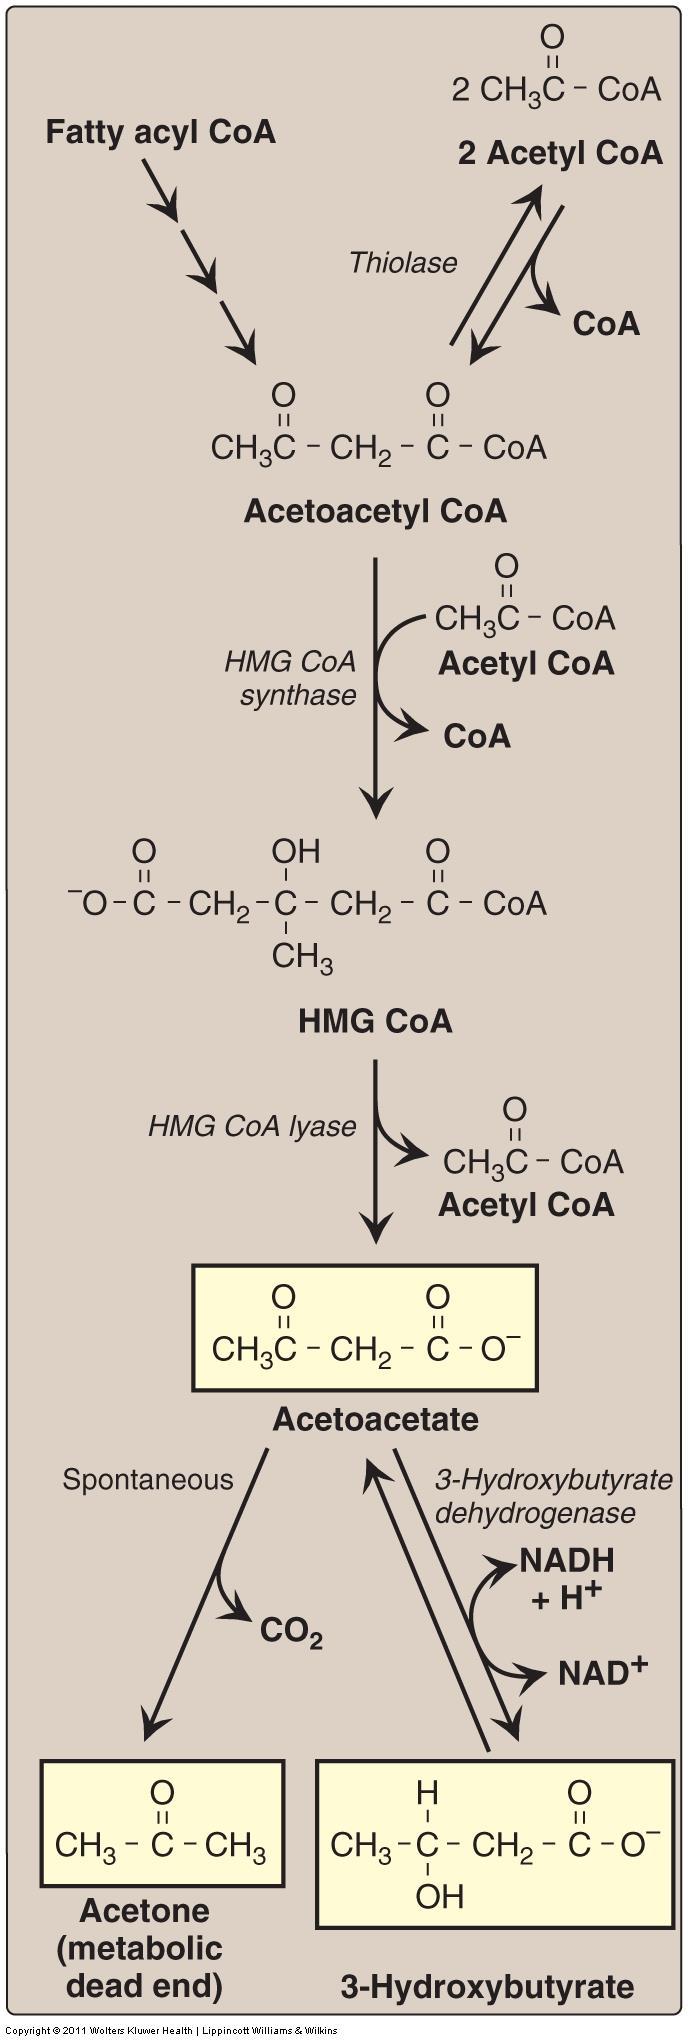 Ketone bodies are synthesized by two steps: first step, acetyl CoA forming acetoacetyl CoA, by reversal of the thiolase reaction.